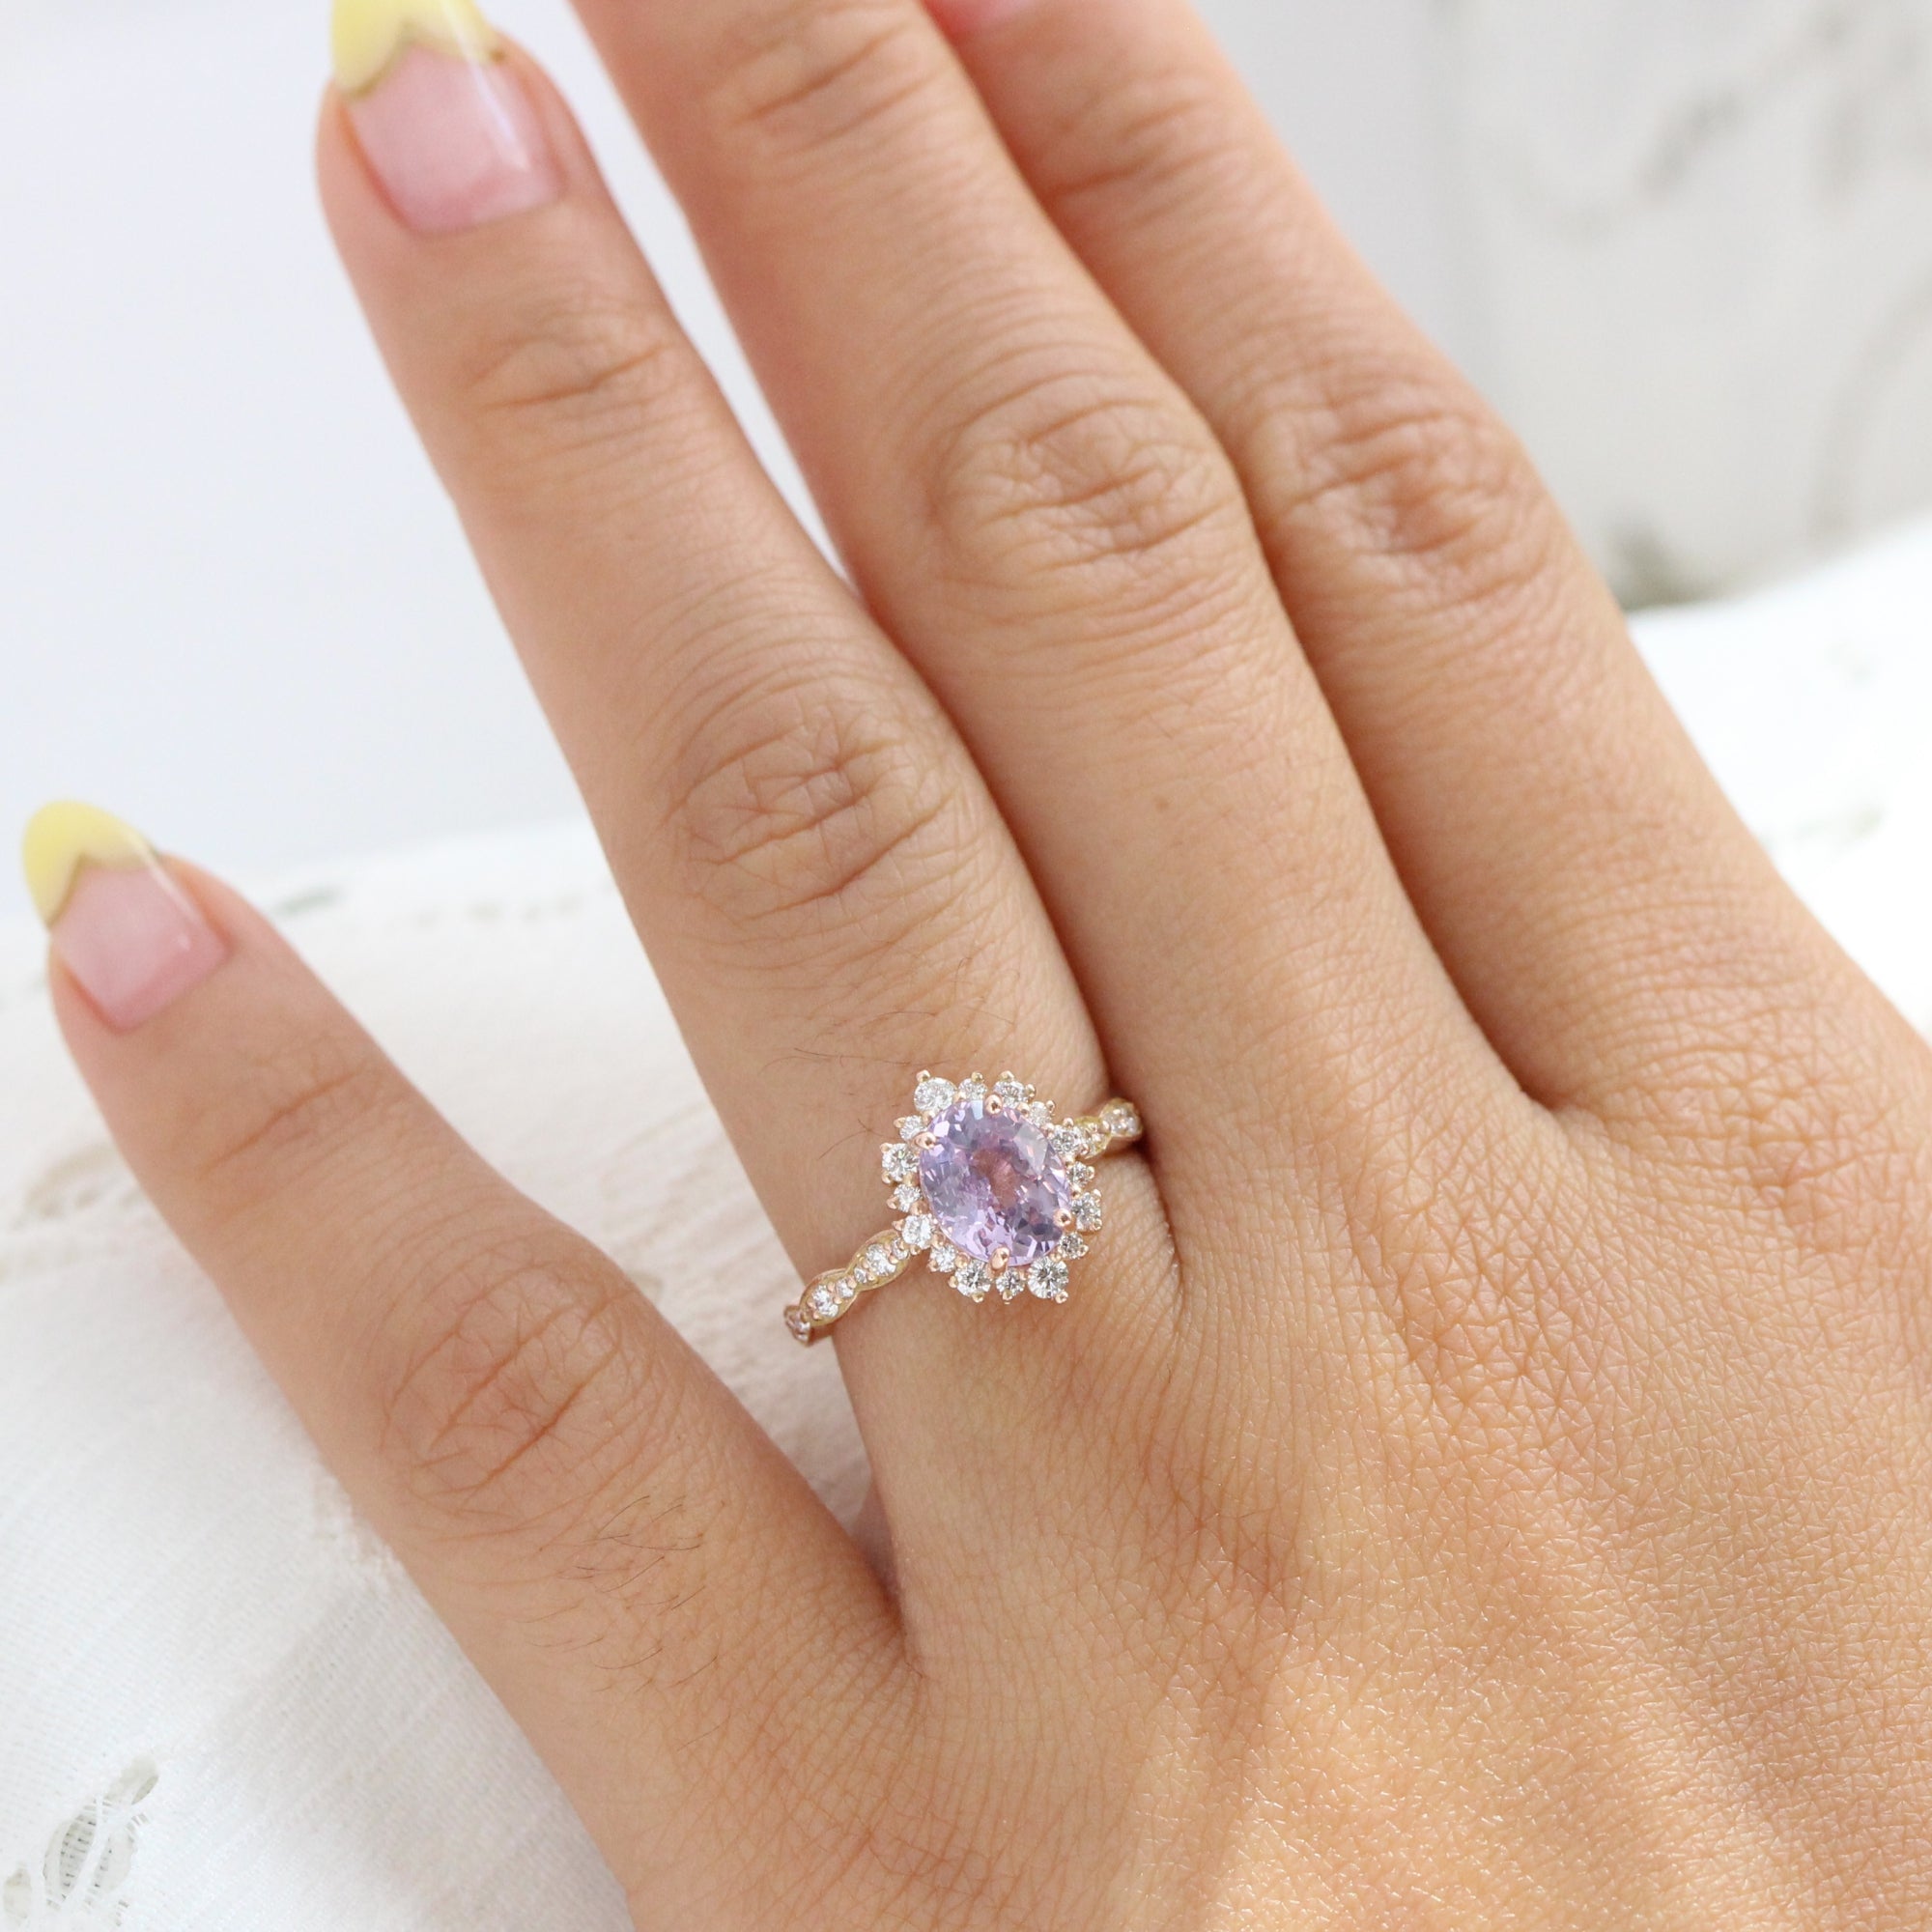 Lavender sapphire ring rose gold halo diamond oval engagement ring la more design jewelry